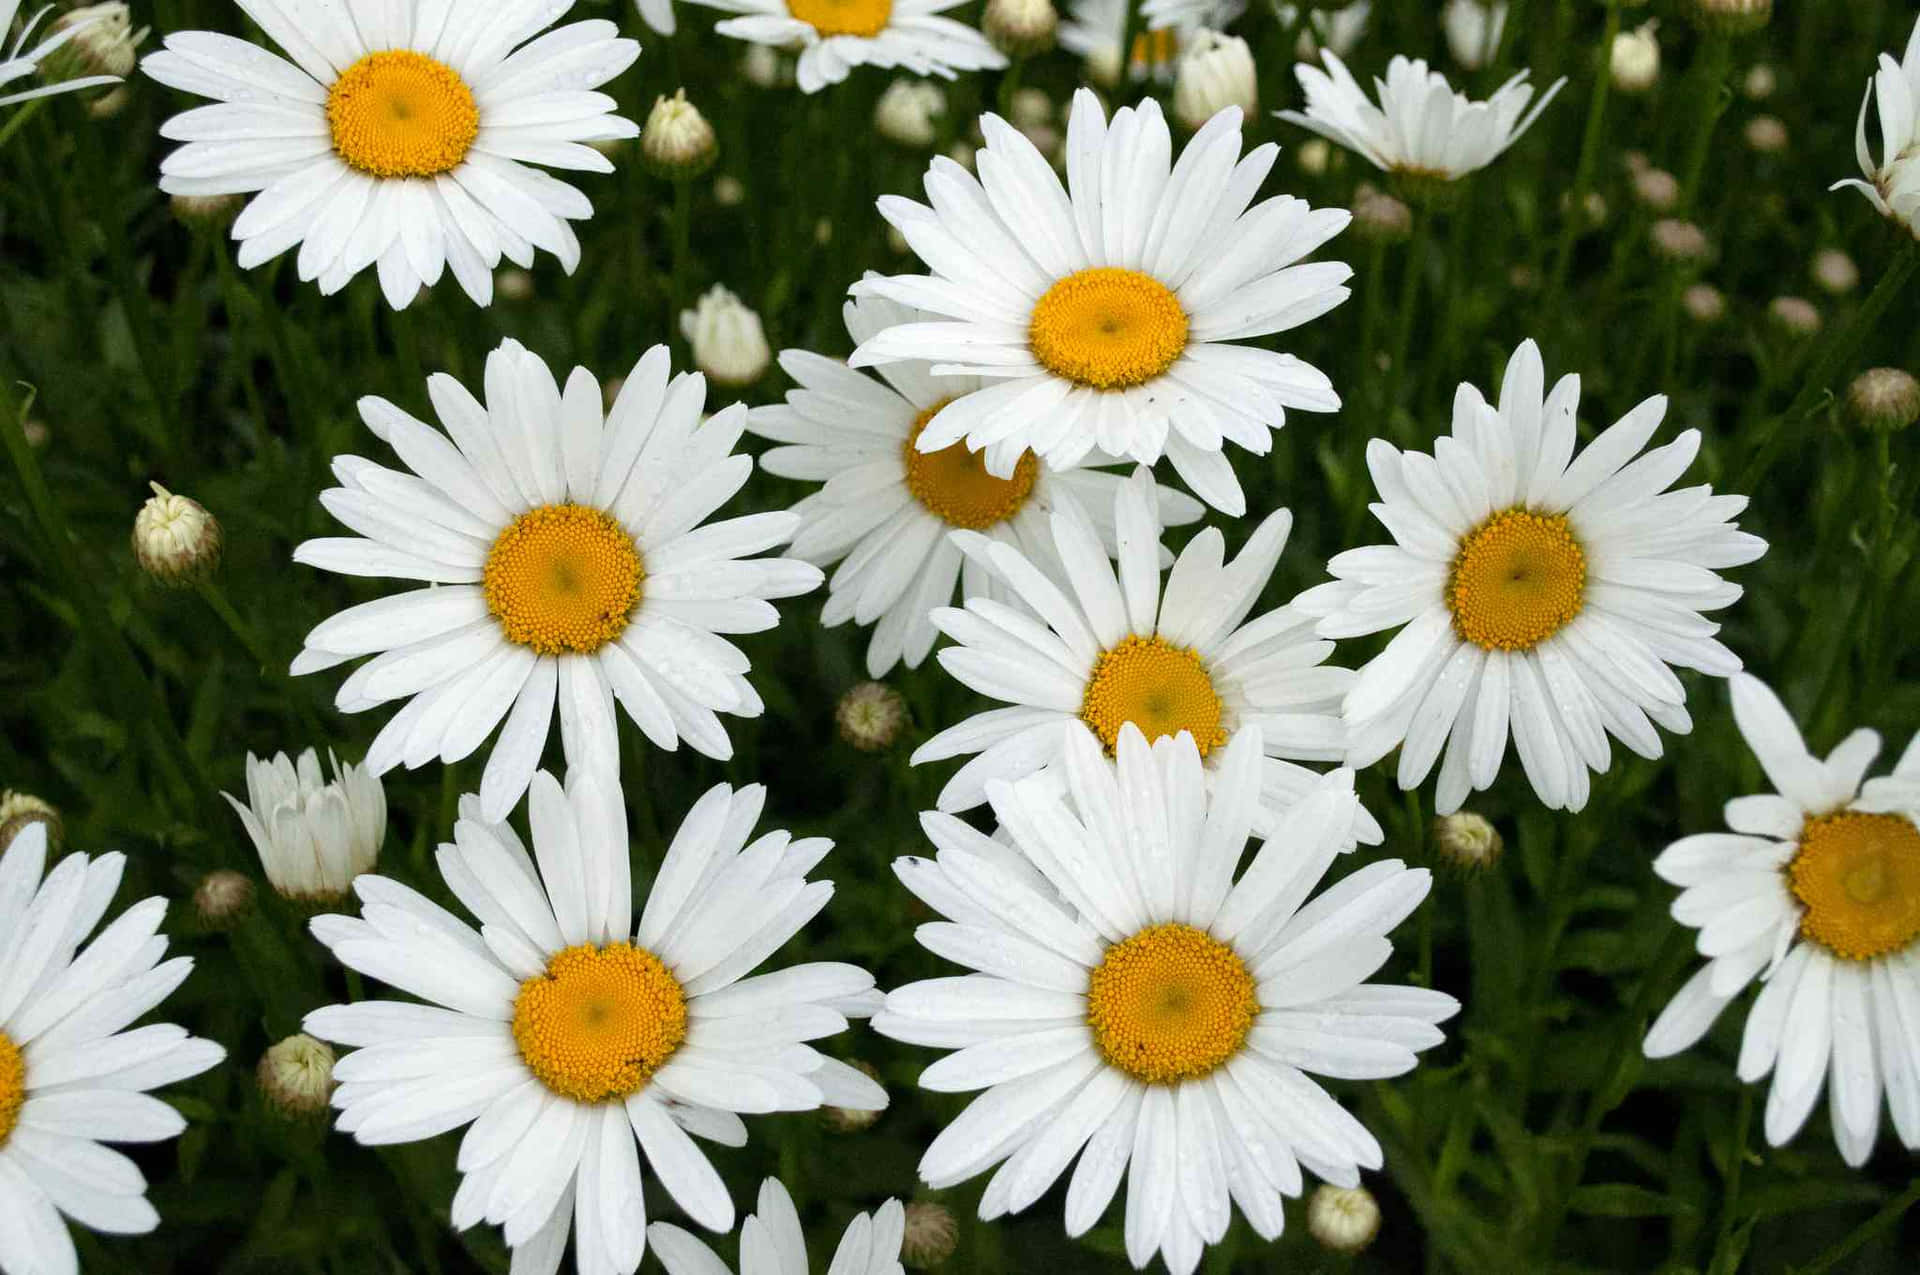 "A Daisy bathed in sunlight, creating a beautiful contrast between the bright yellow petals and the dark green foliage."